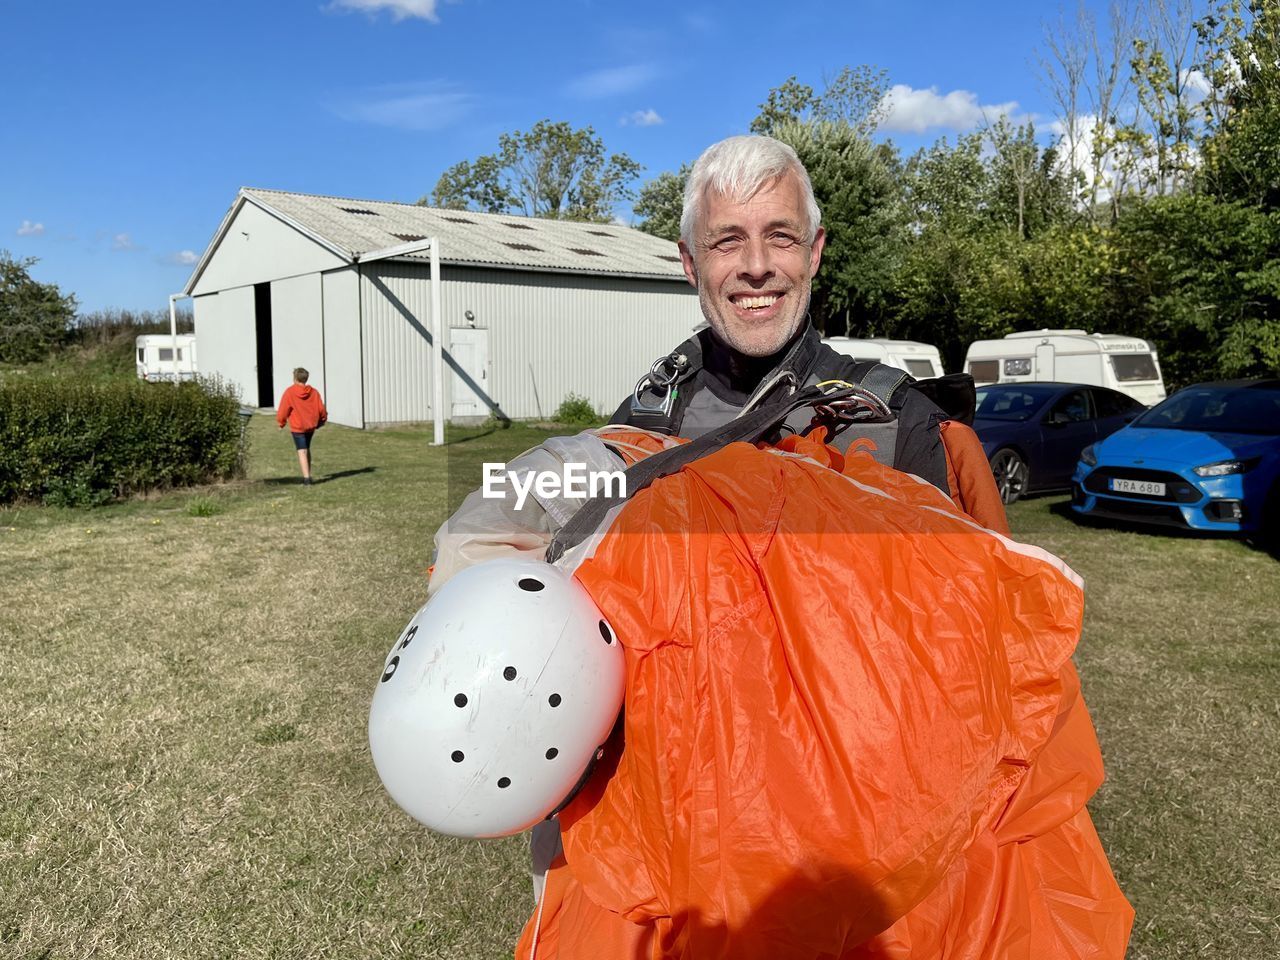 Hsppw skydiver after landing with orange  parachute.